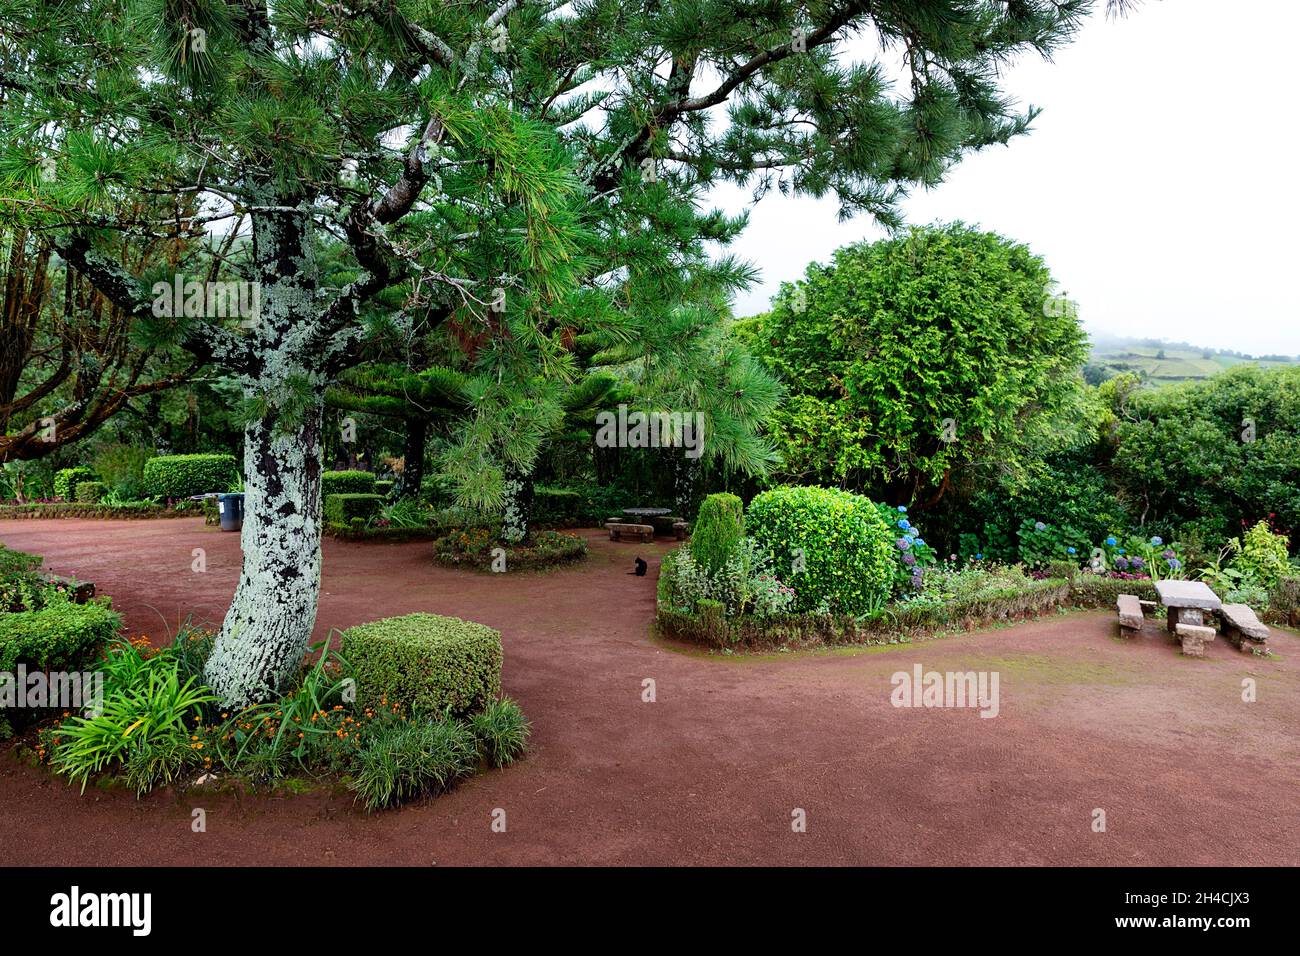 Gardens and a sitting bench at the Miradouro da Ponta do Sossego resting area at the Sao Miguel island in Azores, Portugal Stock Photo